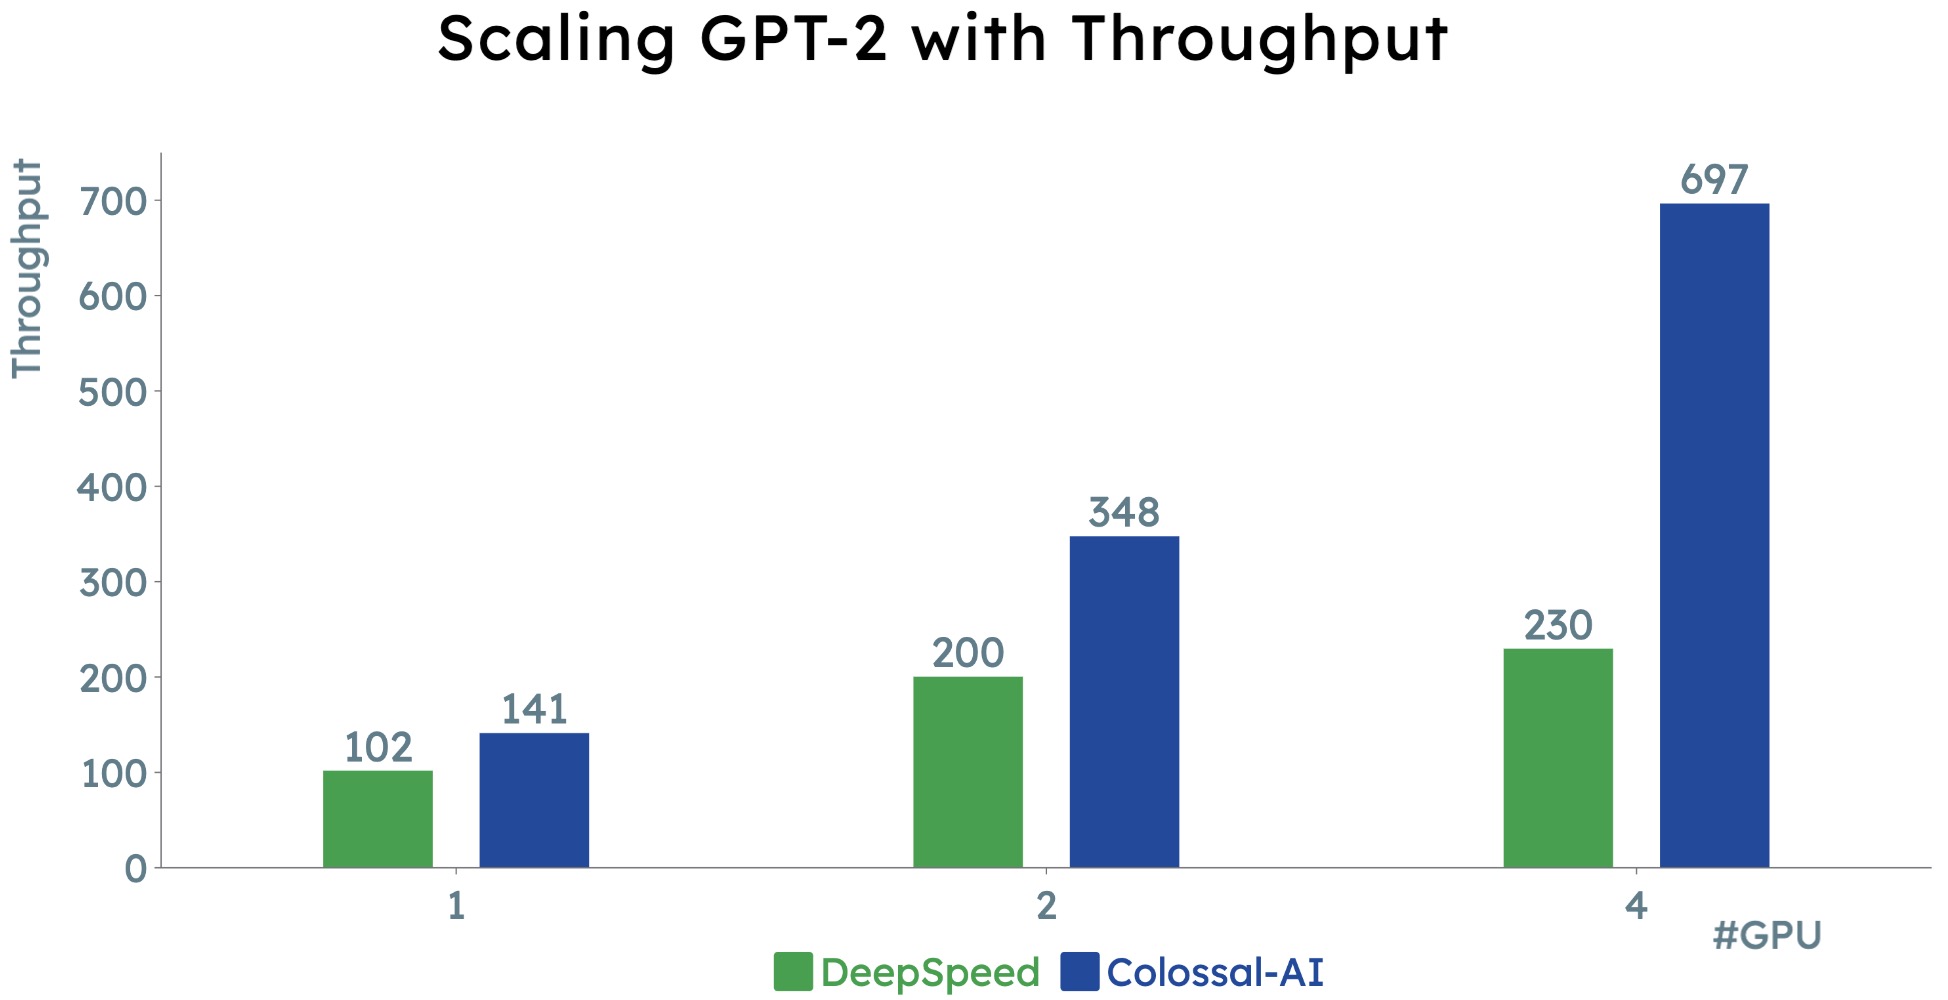 Scaling GPT-2 with Throughput